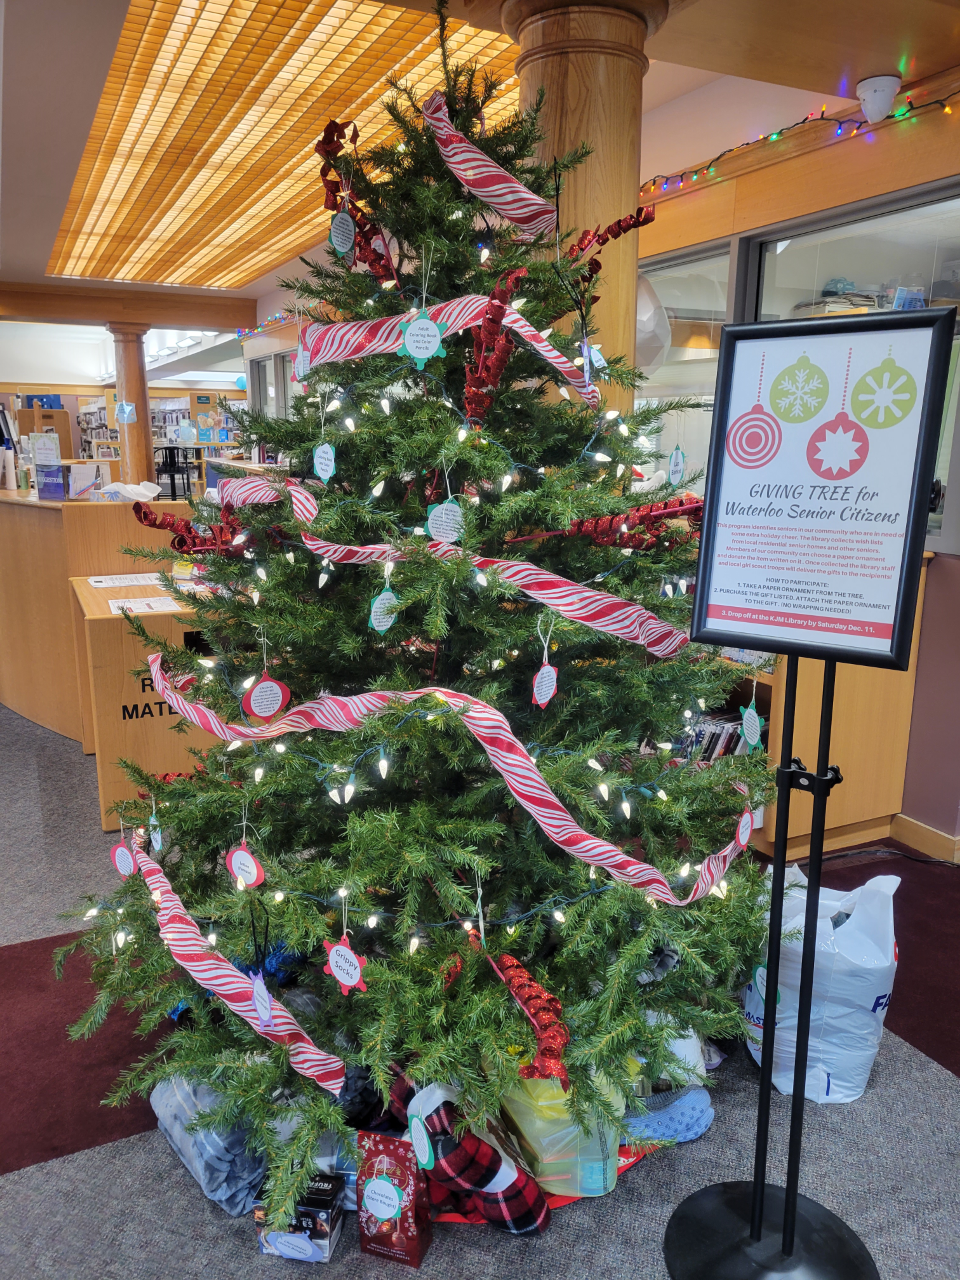 Decorated Christmas tree in lobby of library